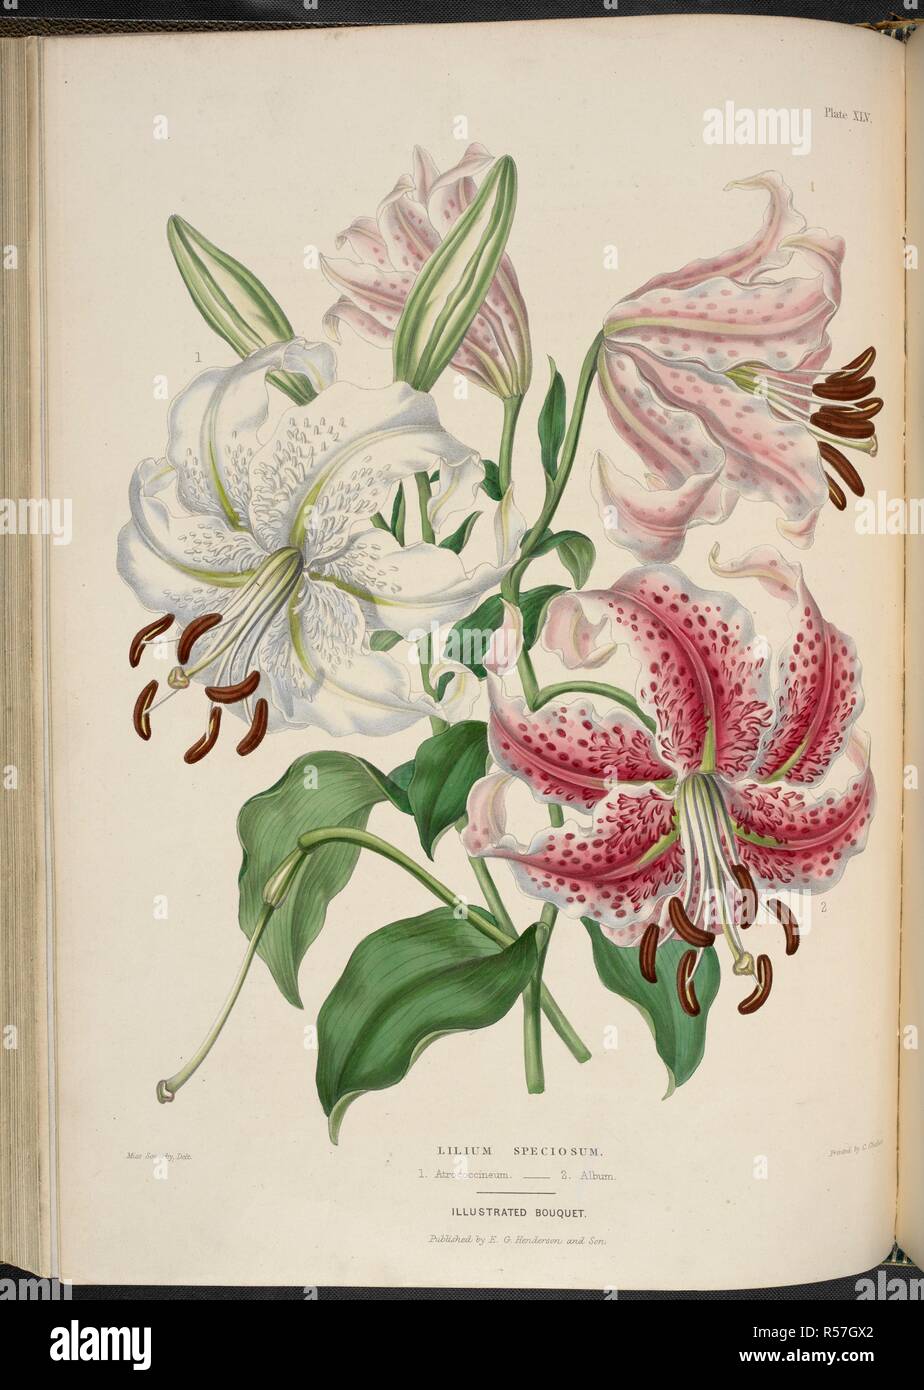 Lilium speciosum. Lilium speciosum. 1. Atrococcineum; 2. Album. Lily. The Illustrated Bouquet, consisting of figures, with descriptions of new flowers. London, 1857-64. Source: 1823.c.13 plate 45. Author: Henderson, Edward George. Sowerby, Miss. Stock Photo